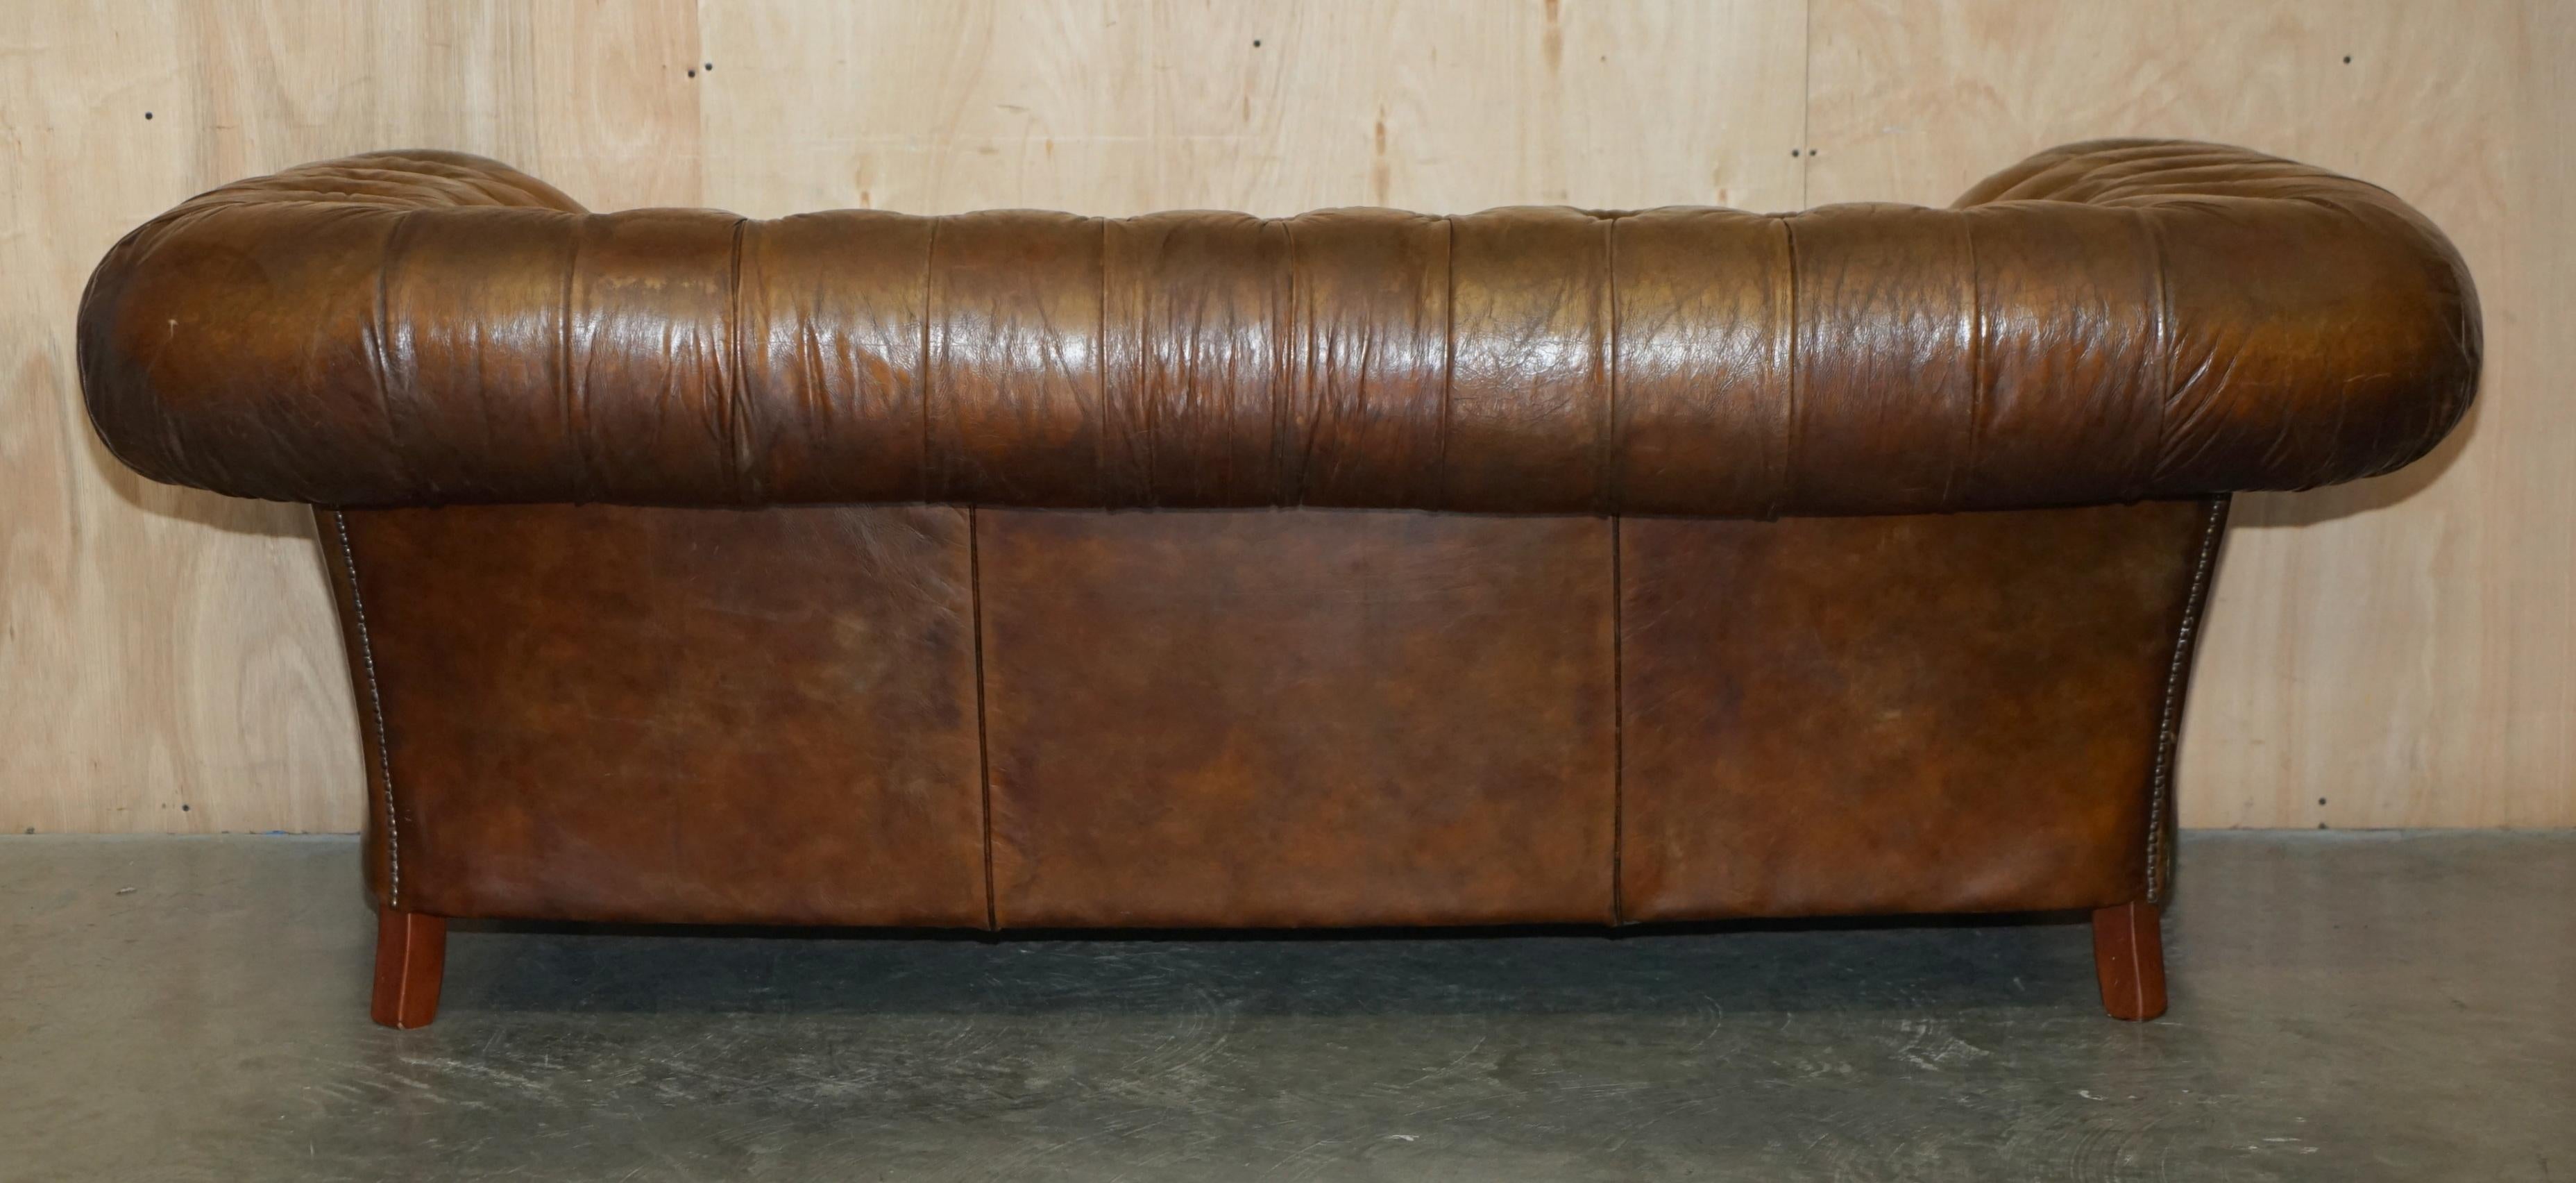 1 von 2 TIMOTHY OULTON HERiTAGE BROWN VINTAGE LEATHER CHESTERFIELD HALO SOFAS im Angebot 30